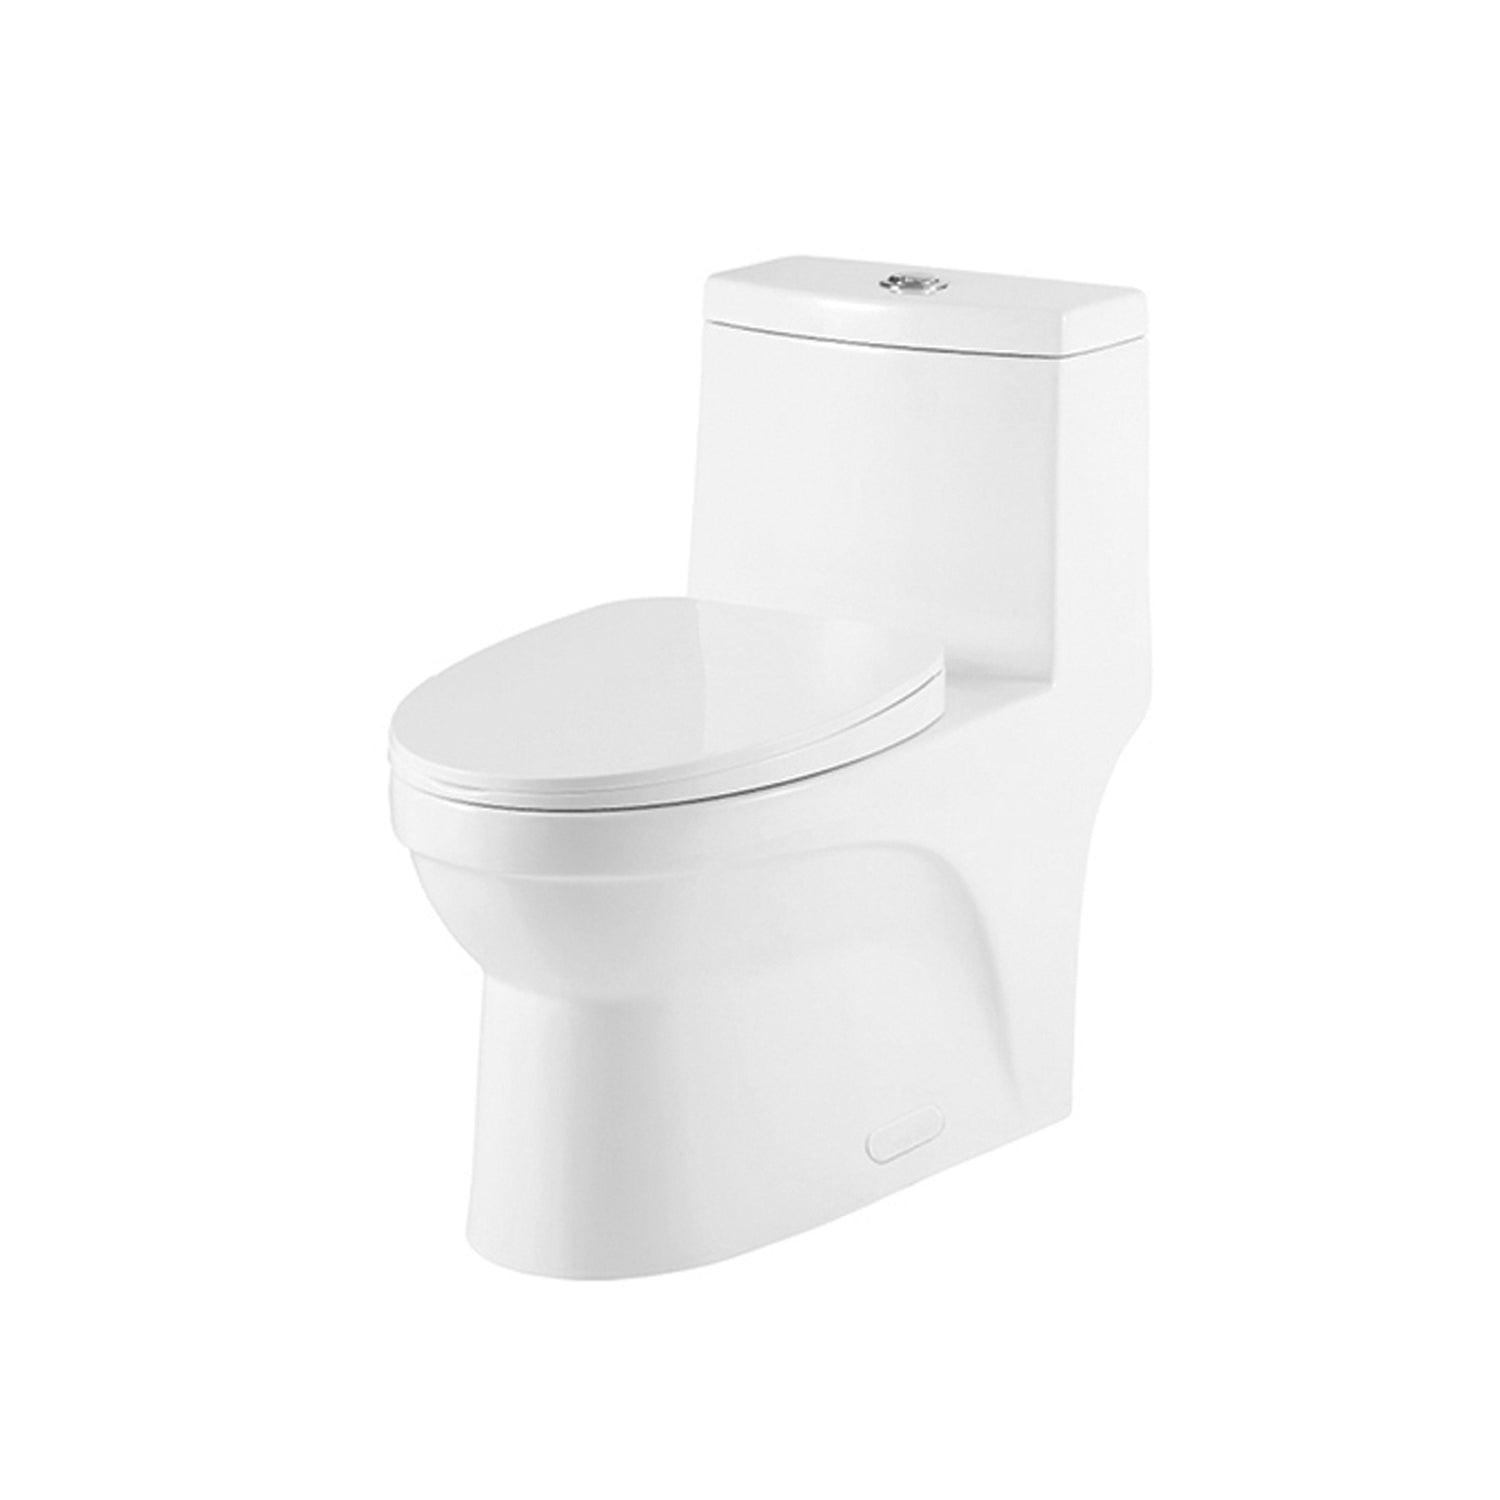 DAX One Piece Oval Toilet with Soft Closing Seat and Dual Flush High-Efficiency, Porcelain, White Finish, Height 16-9/16 Inches (BSN-CL12050A)